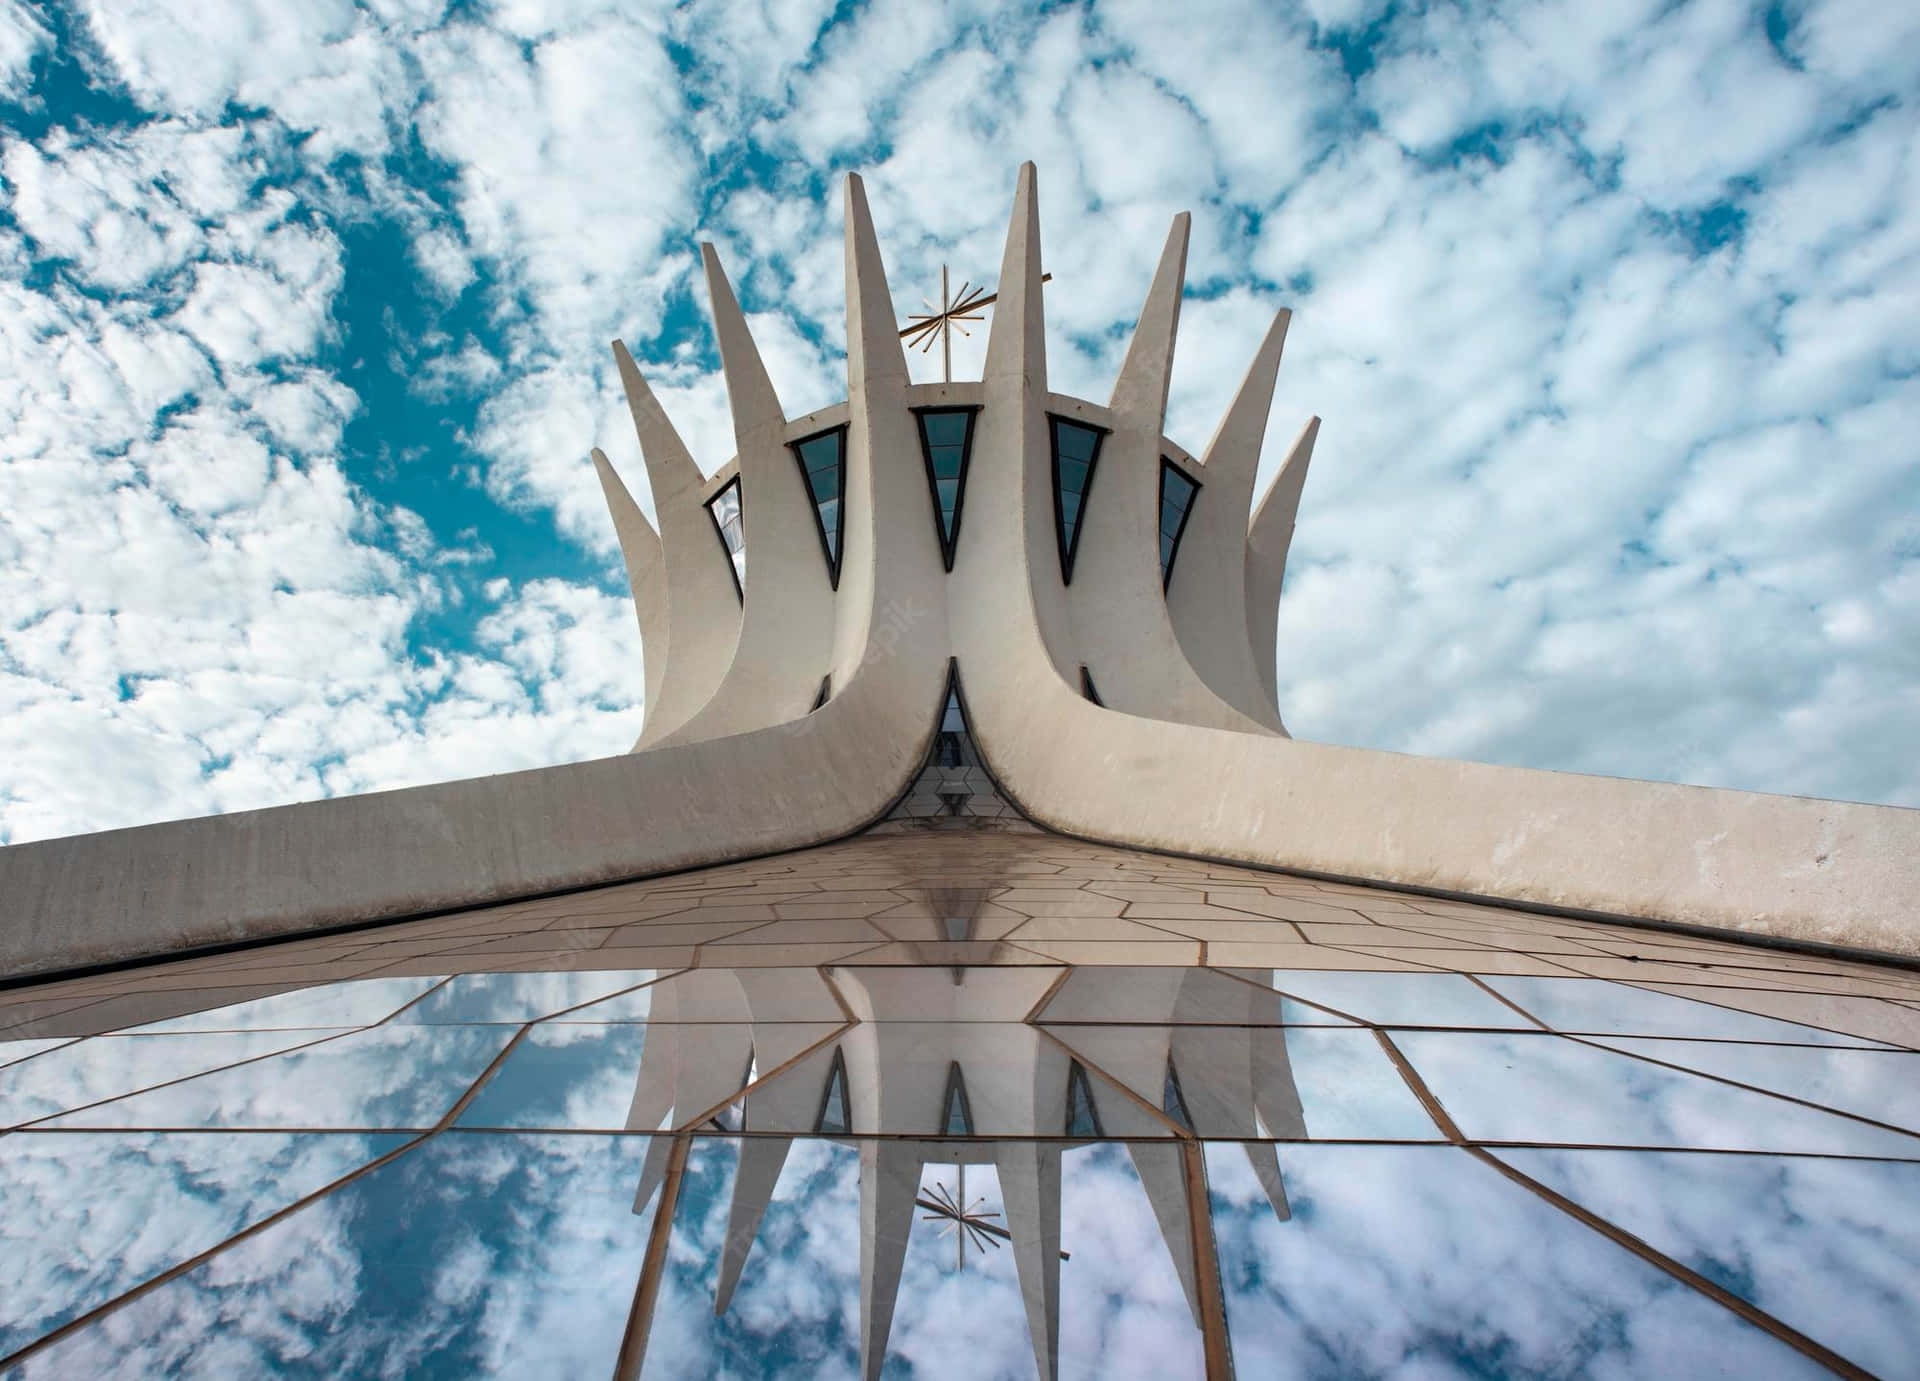 Cathedral Of Brasilia Reflection Wallpaper